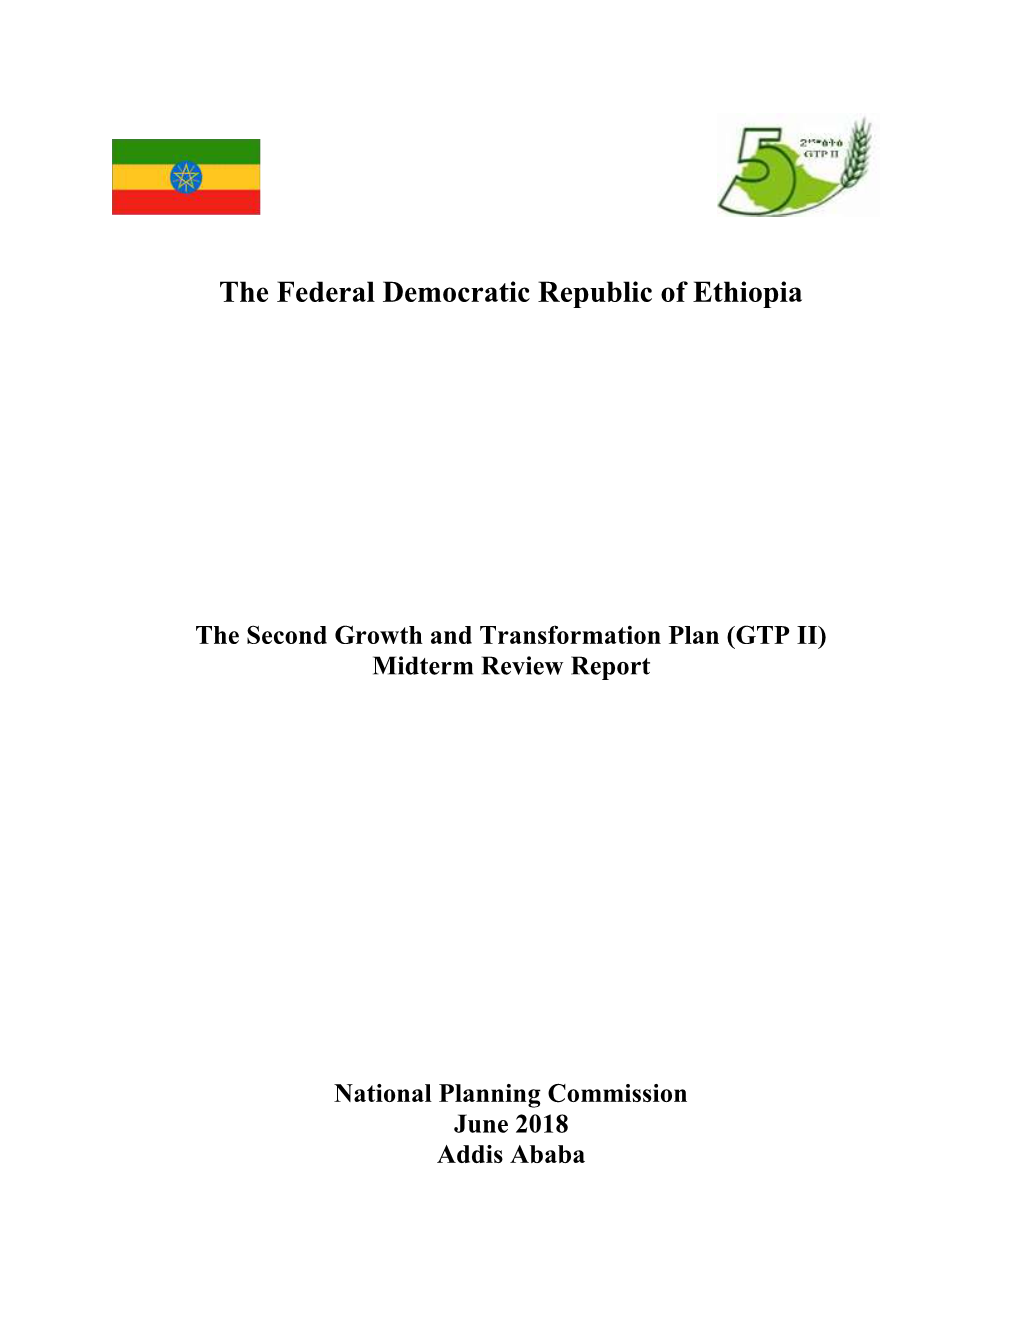 The Second Growth and Transformation Plan (GTP II) Midterm Review Report National Planning Commission June 2018 Addis Ababa